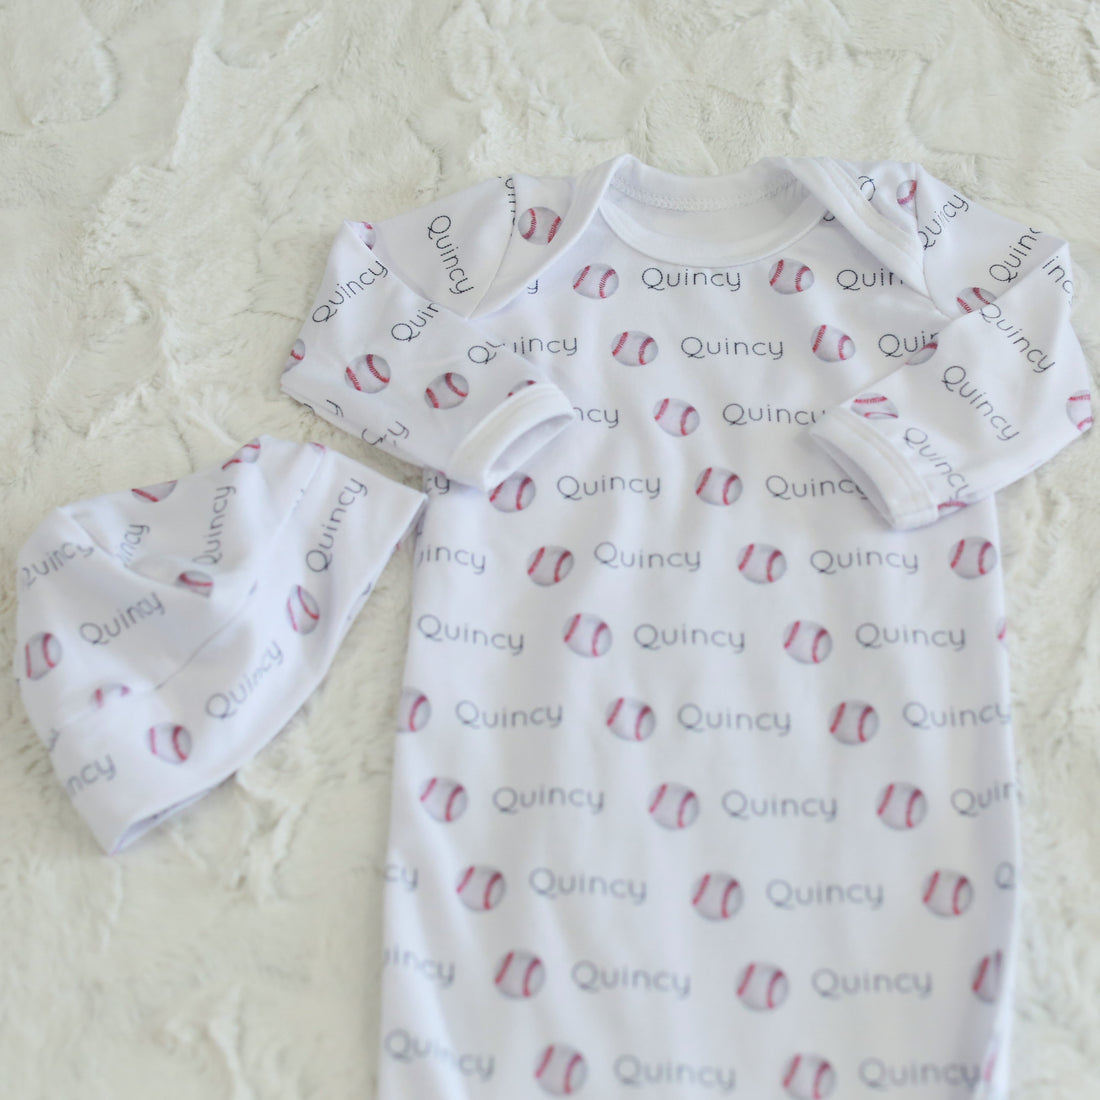 Baseball Dreams Knotted Baby Gown